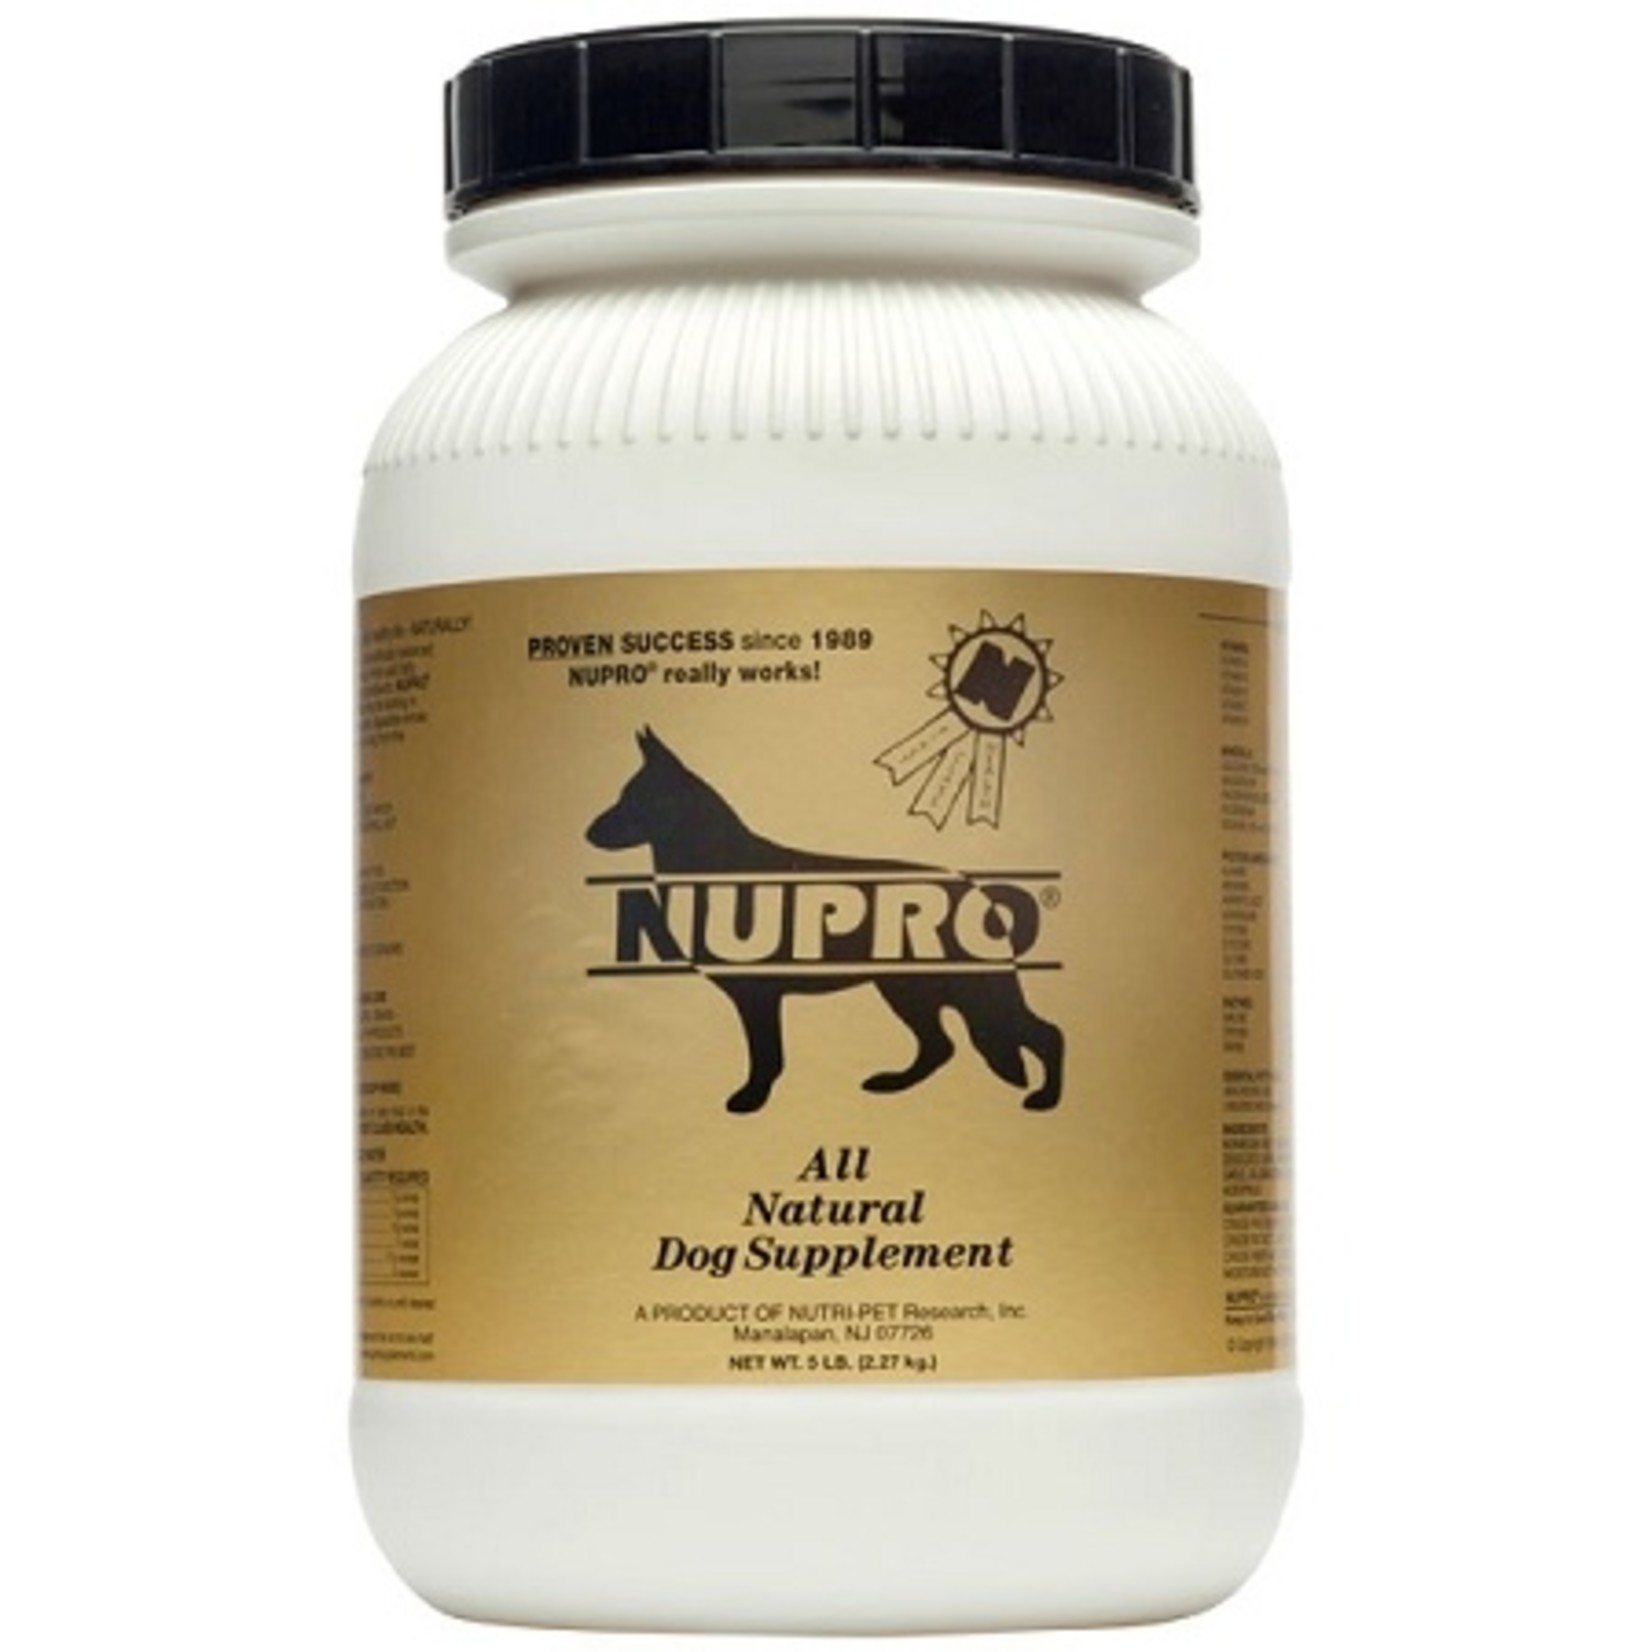 Nupro Nupro Natural Dog Supplement Gold All-in-One Powder - 1lb, 30oz, 5lb